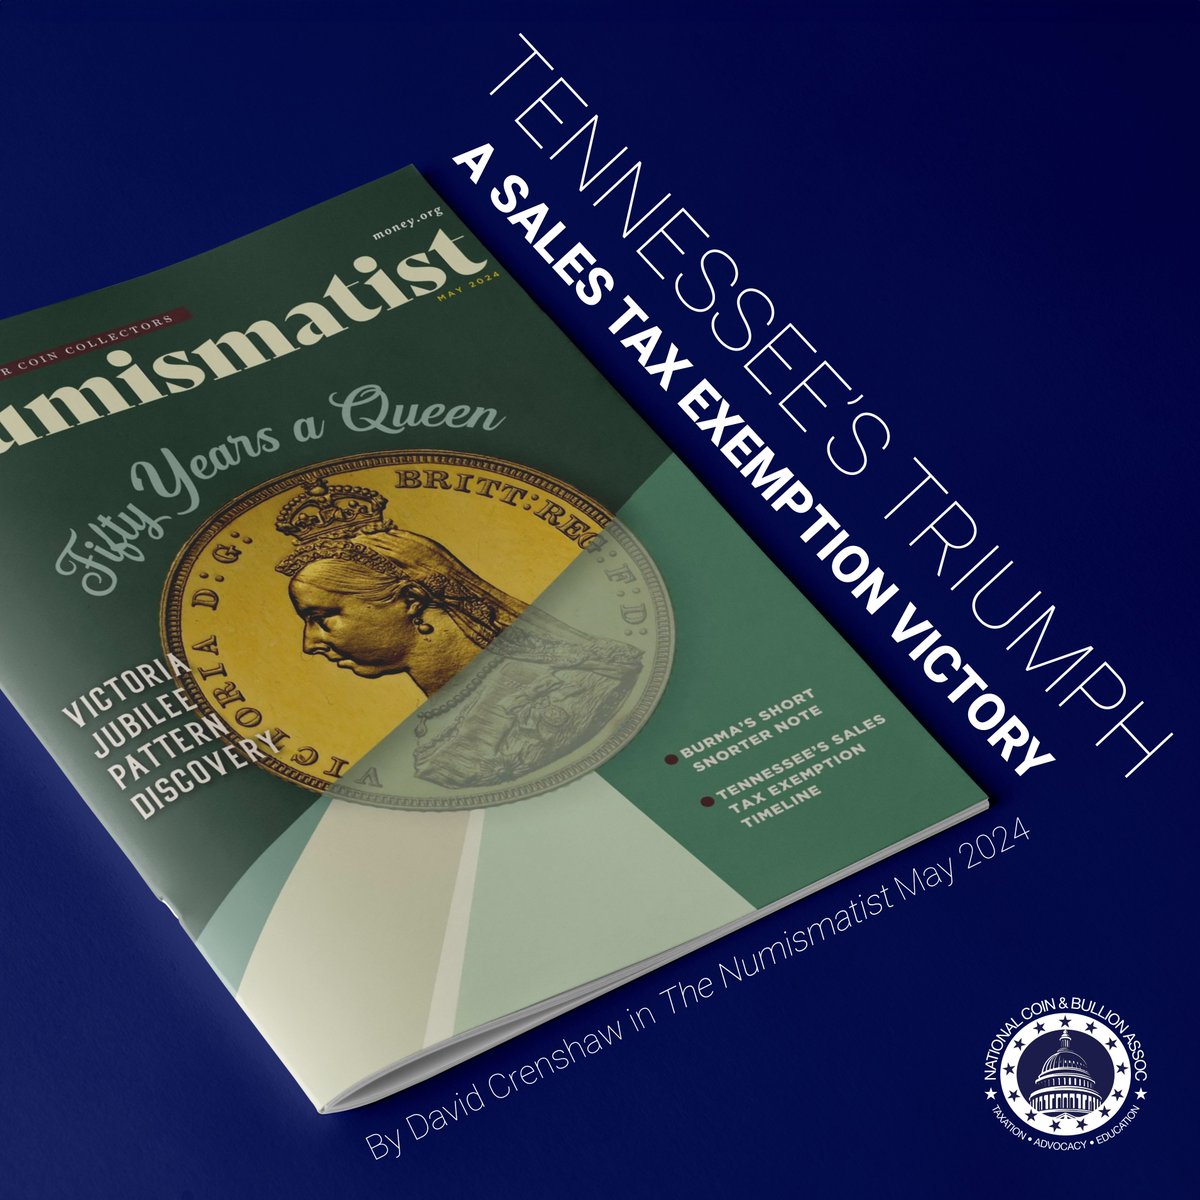 📢 Exciting news! Check out David Crenshaw’s article, “Tennessee's Triumph: A Sales Tax Exemption Victory” in this month’s Numismatist! Learn how NCBA helped secure a sales tax exemption for coins and bullion in Tennessee. Available to ANA members digitally or in print. #TN #ANA